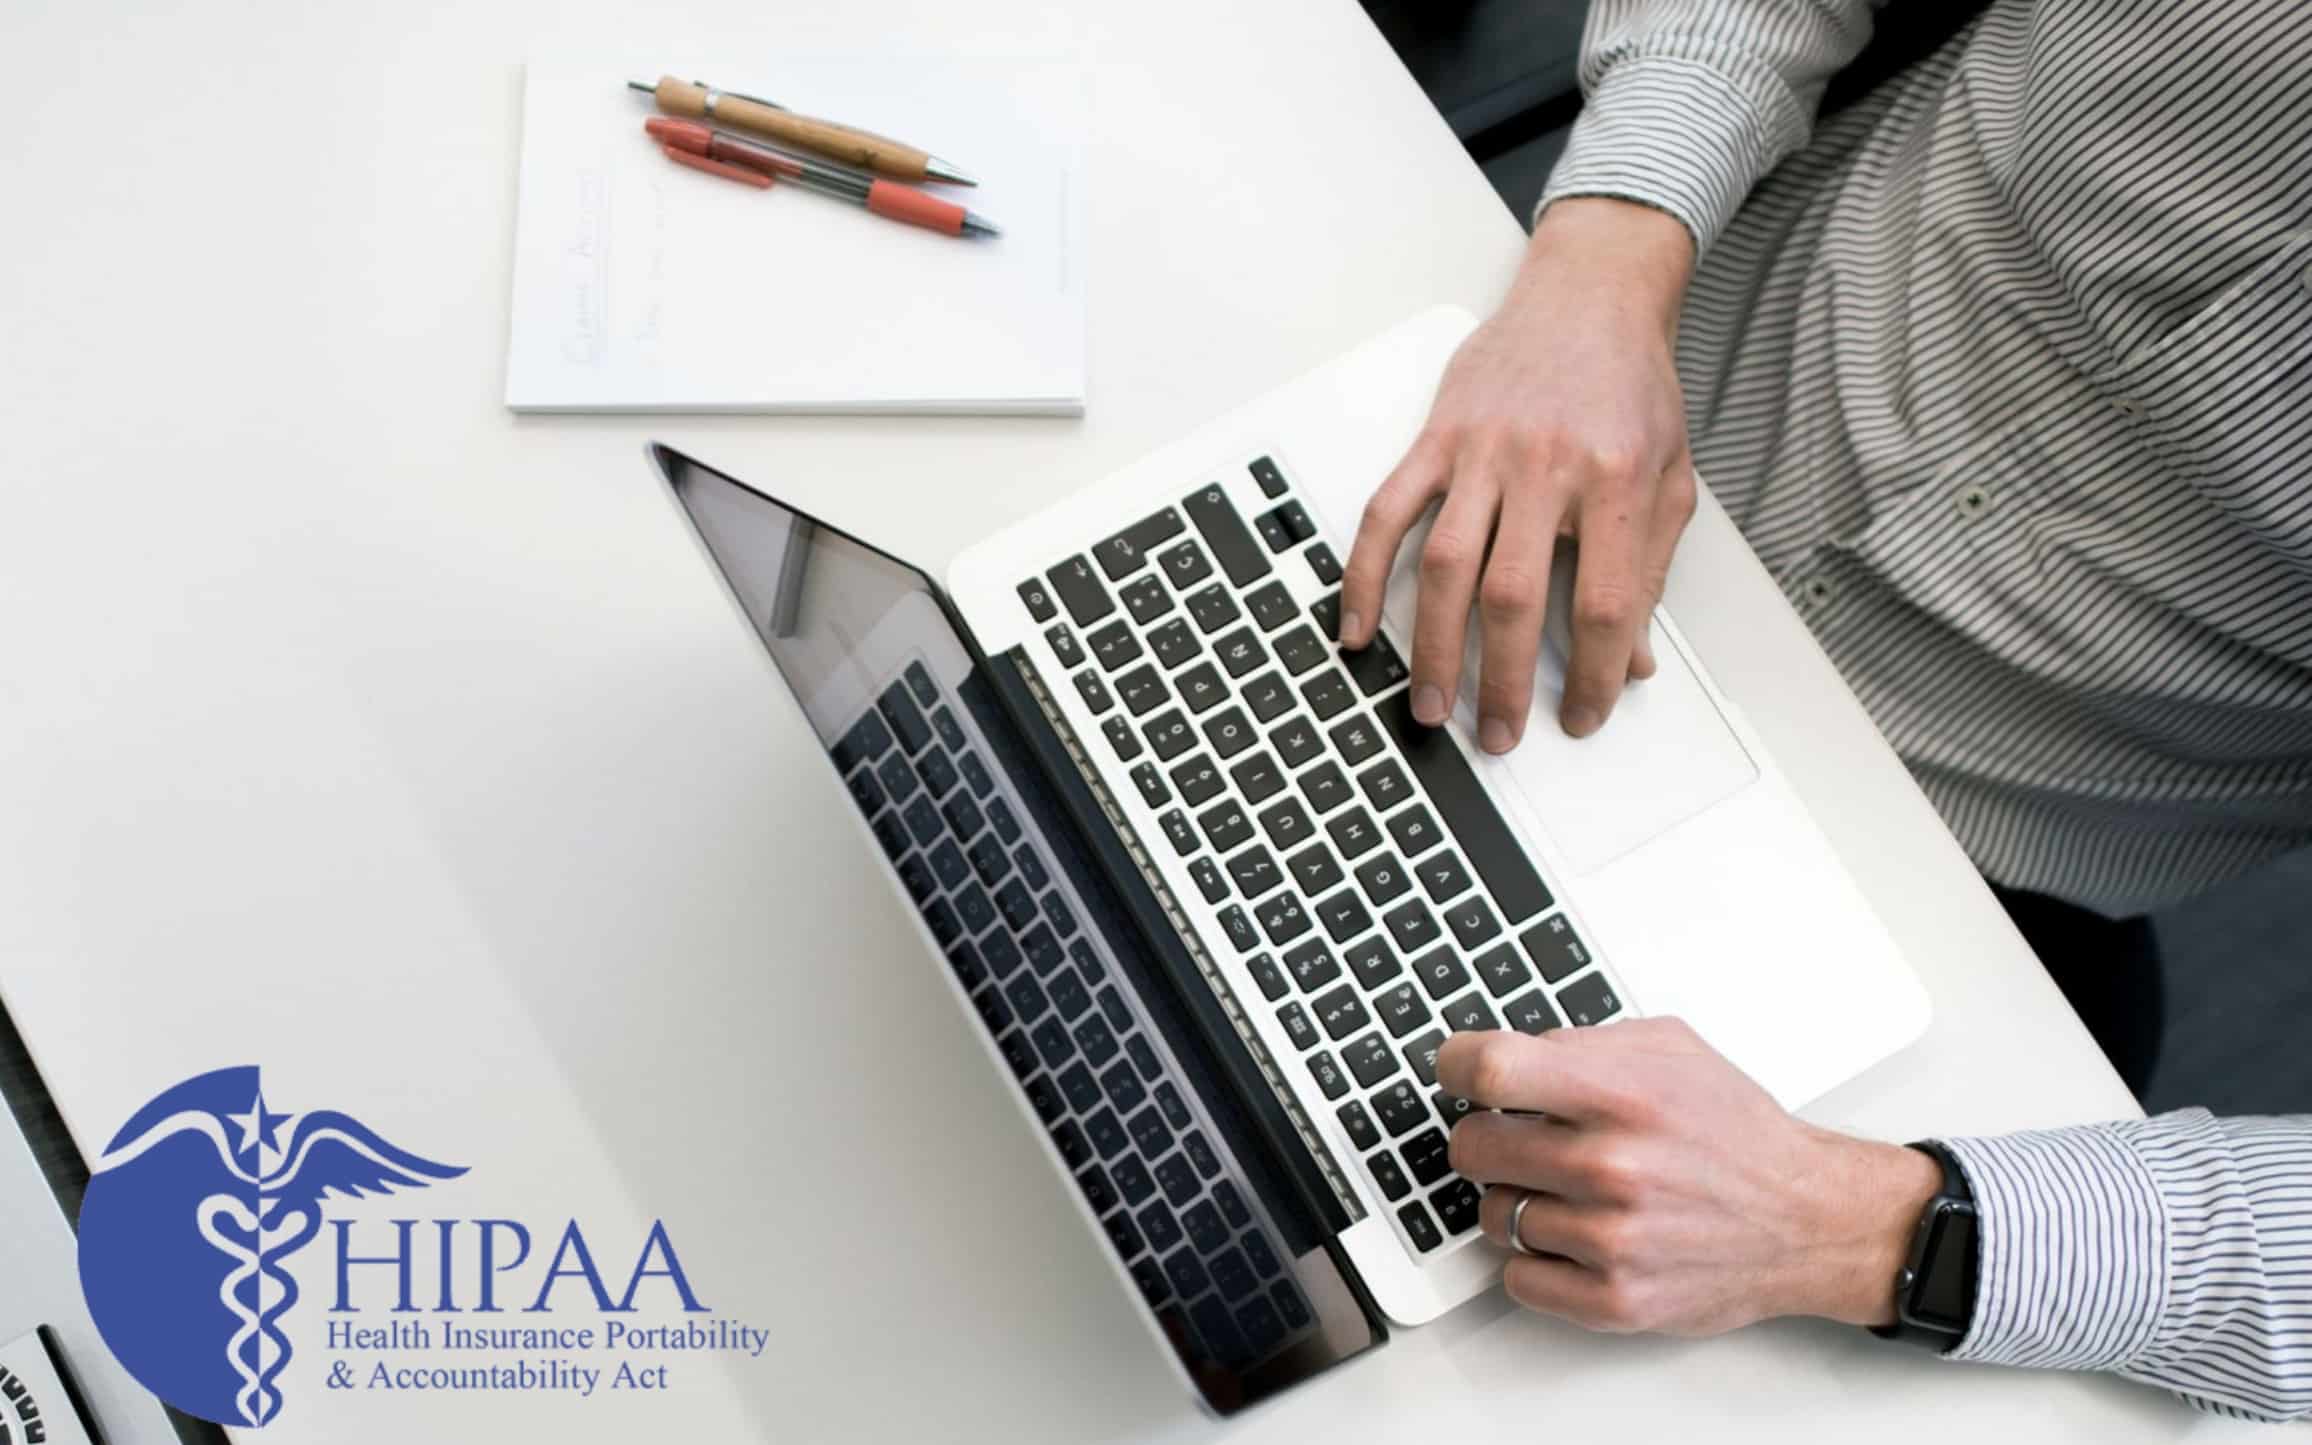 Does HIPAA Apply to Nonprofit Organizations